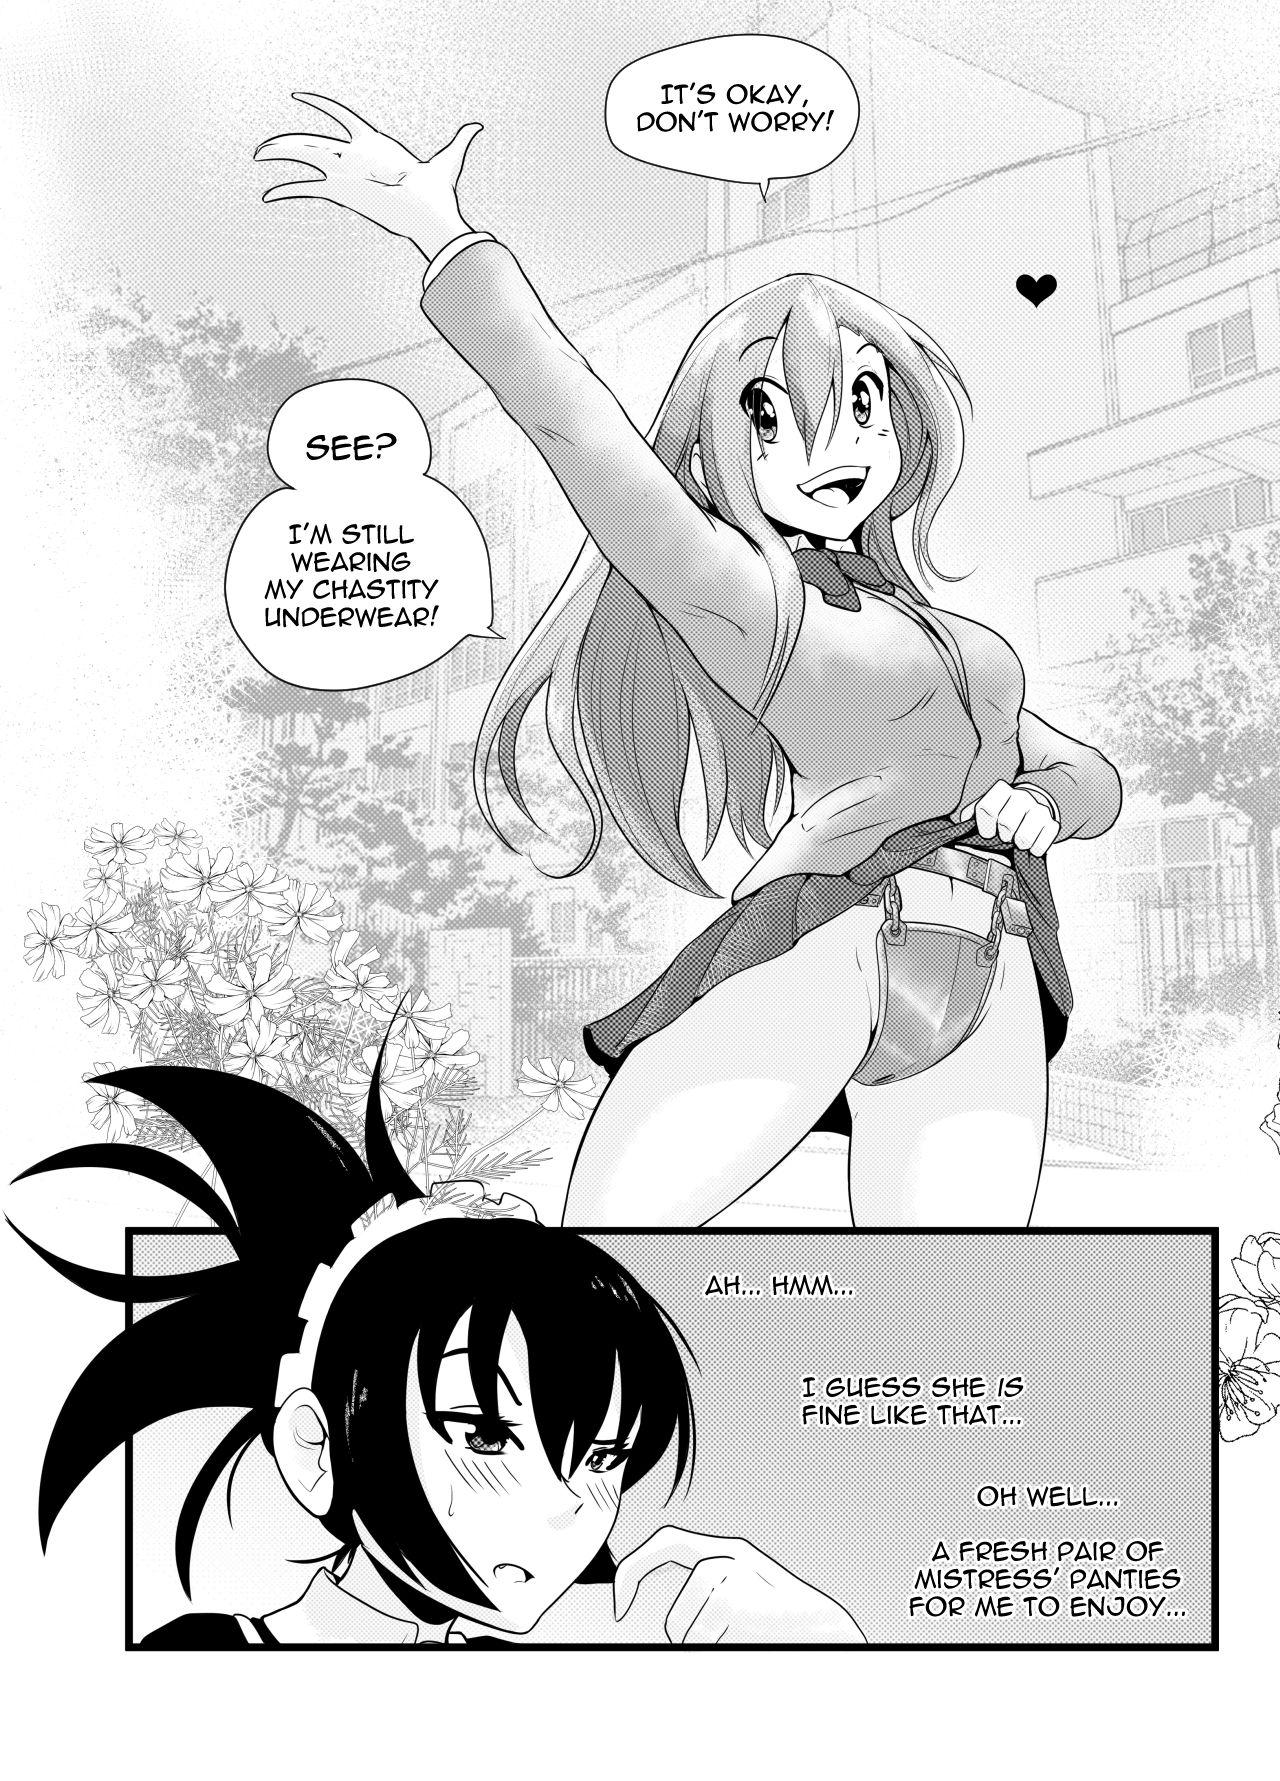 Nipple I Was Caught Masturbating by My Maid and She Locked Me in a Chastity Belt! - Seitokai yakuindomo Penis - Page 12